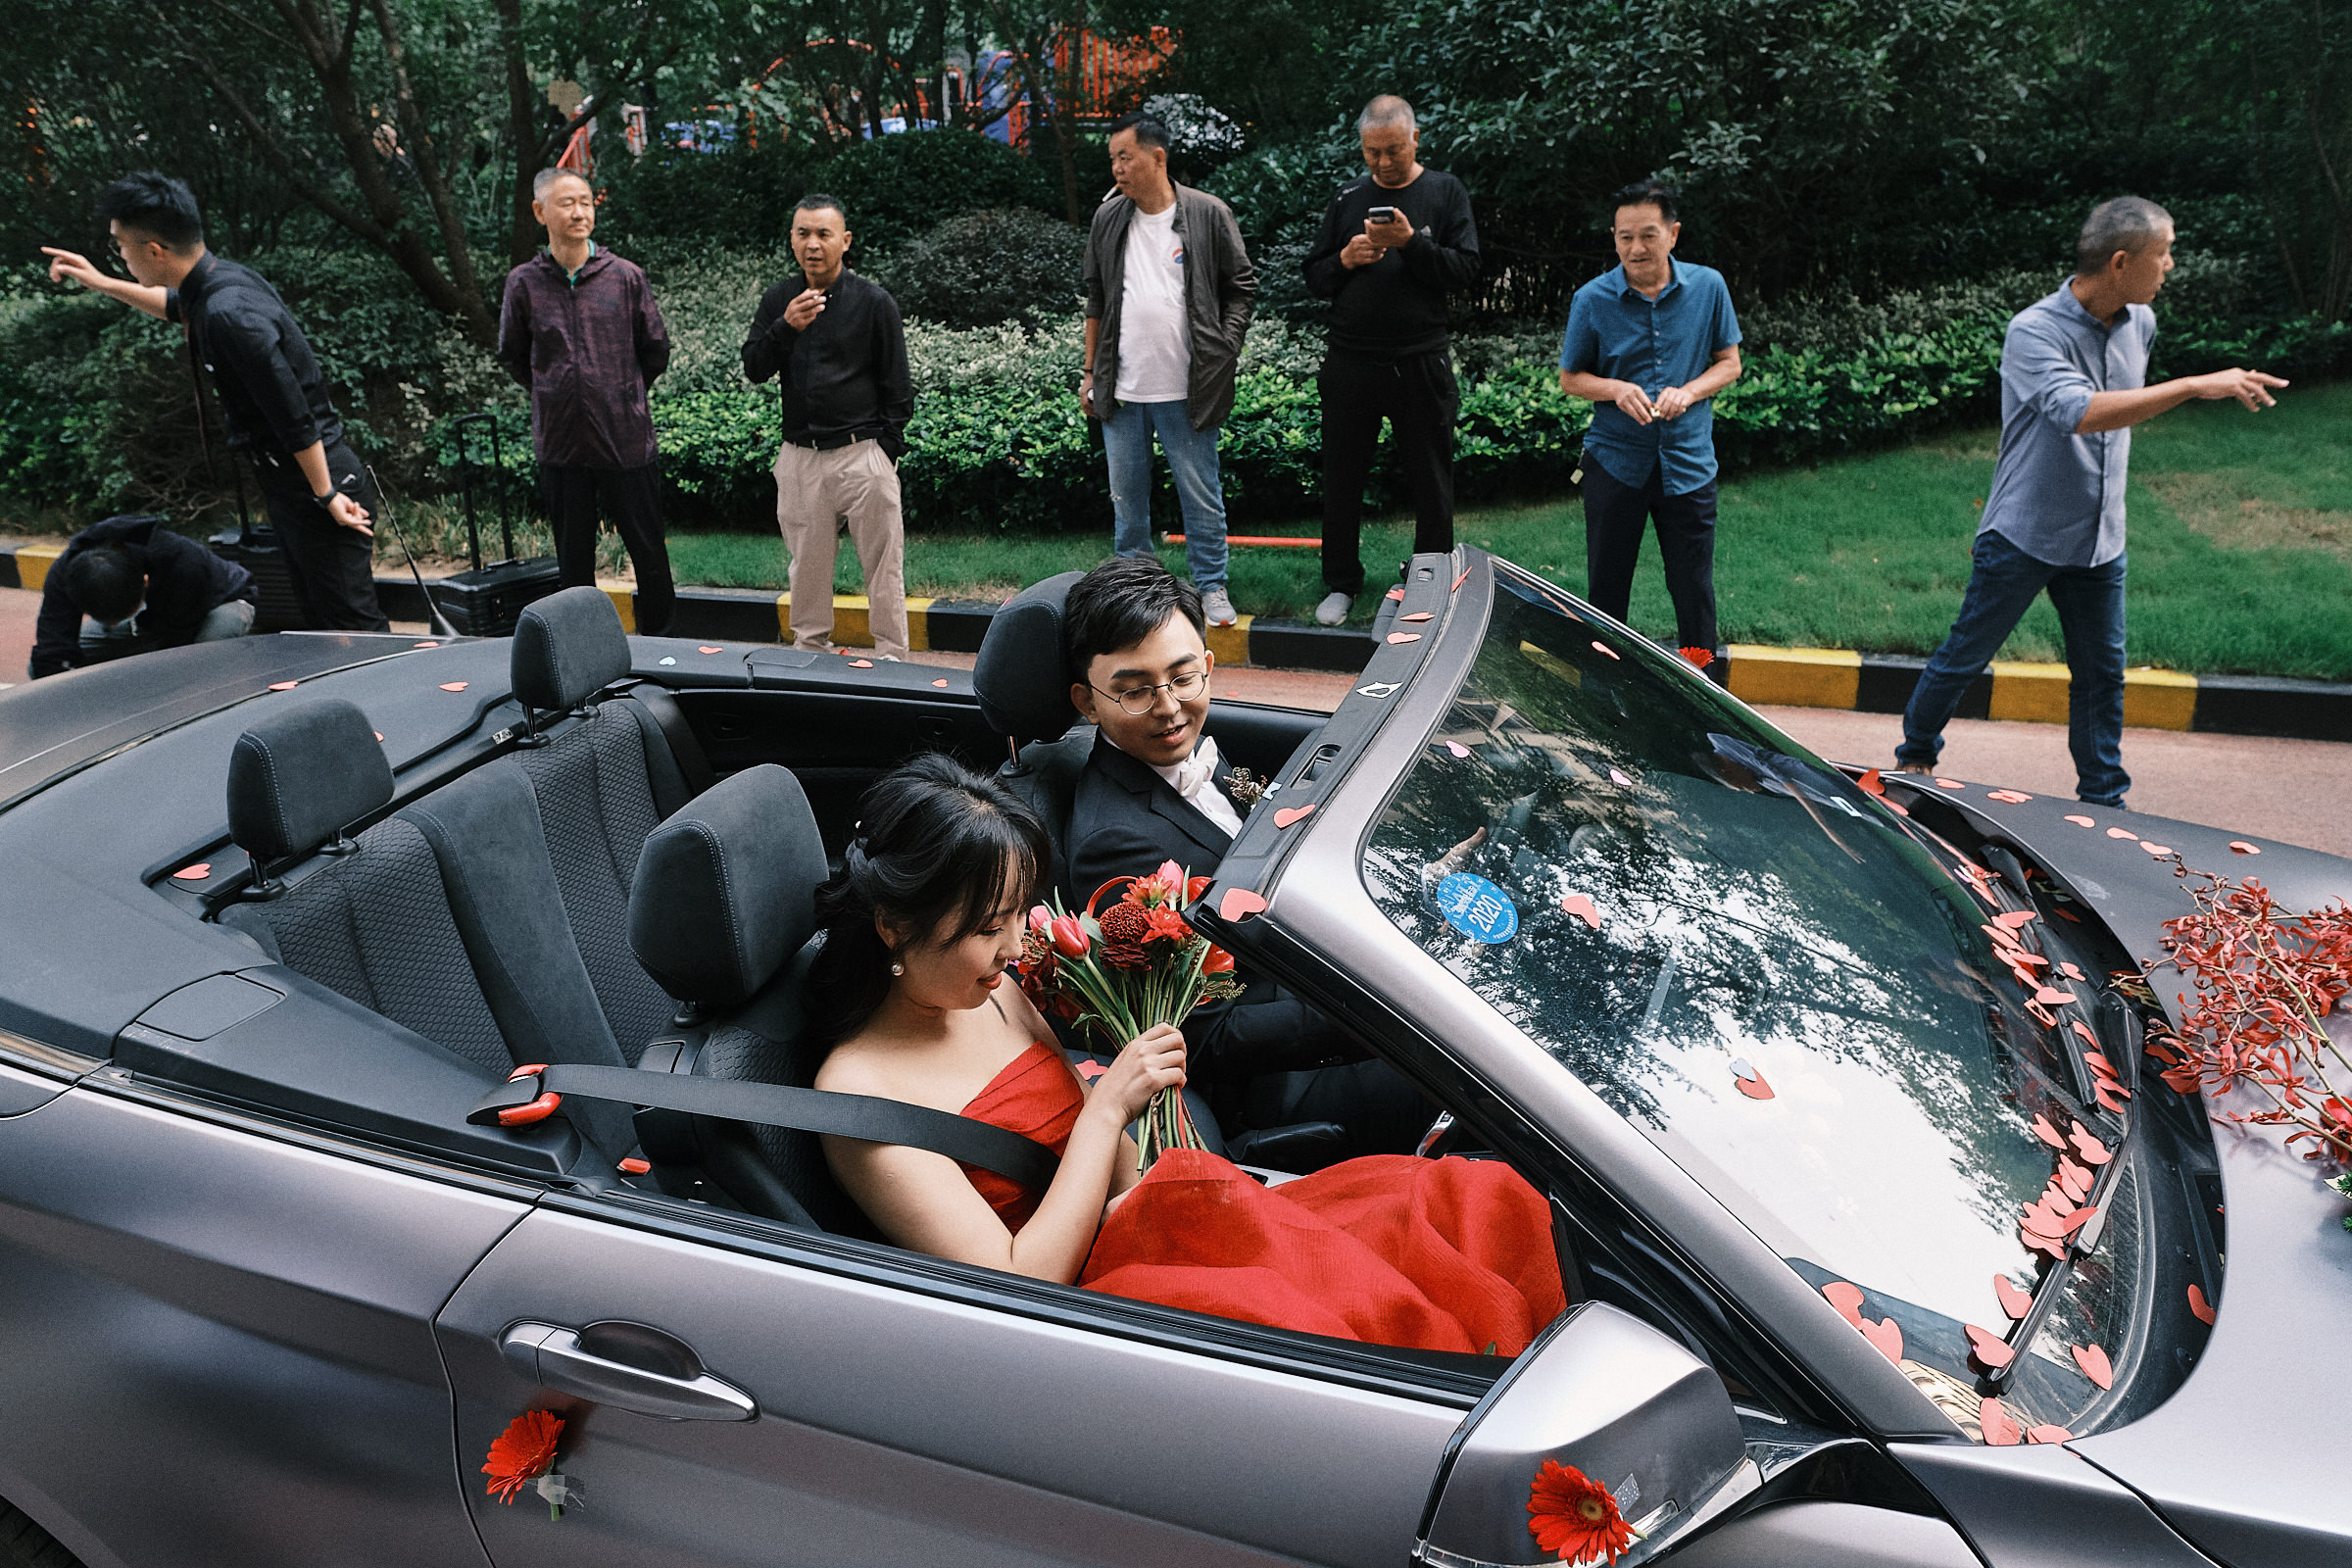 Bride Dressed In Red And Groom Await In The Car As Family Members Stand Behind In Symmetry